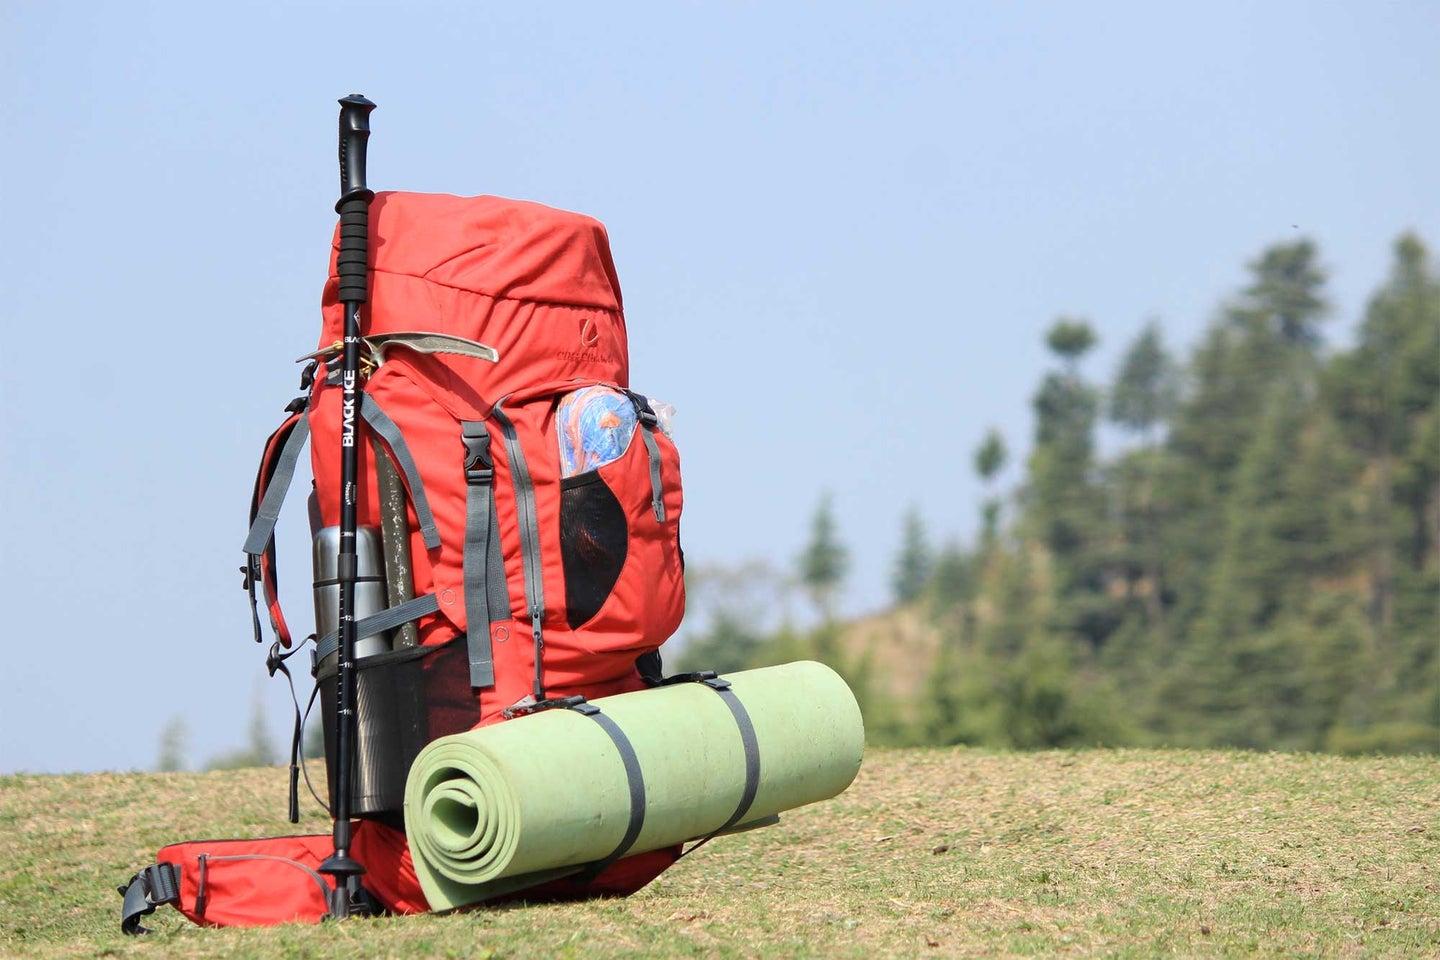 Backpacking equipment on a hill